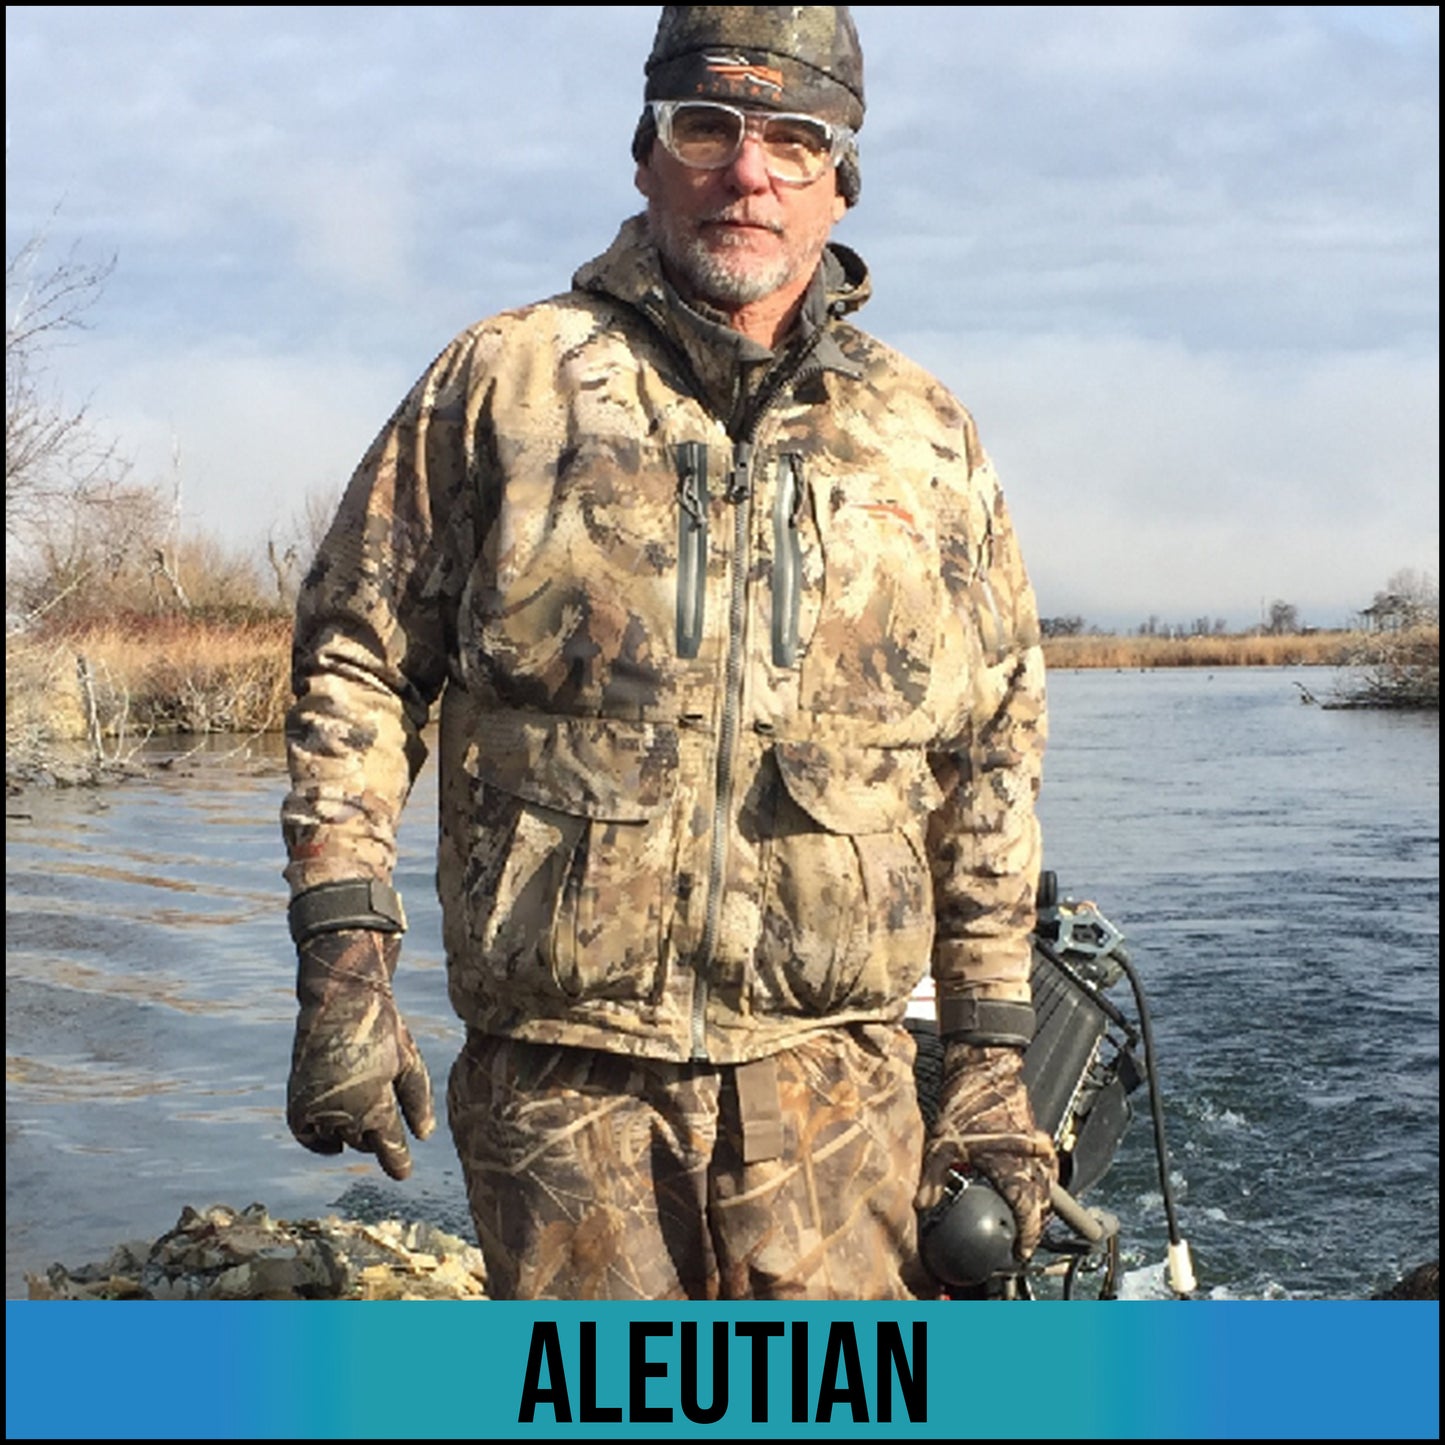 Featuring the Realtree Max-5 HD pattern, the Aleutian is designed with a focus on protection and performance. Its durability and functionality combined with dexterity and comfort makes this glove the perfect choice for cold, wet and windy environments.